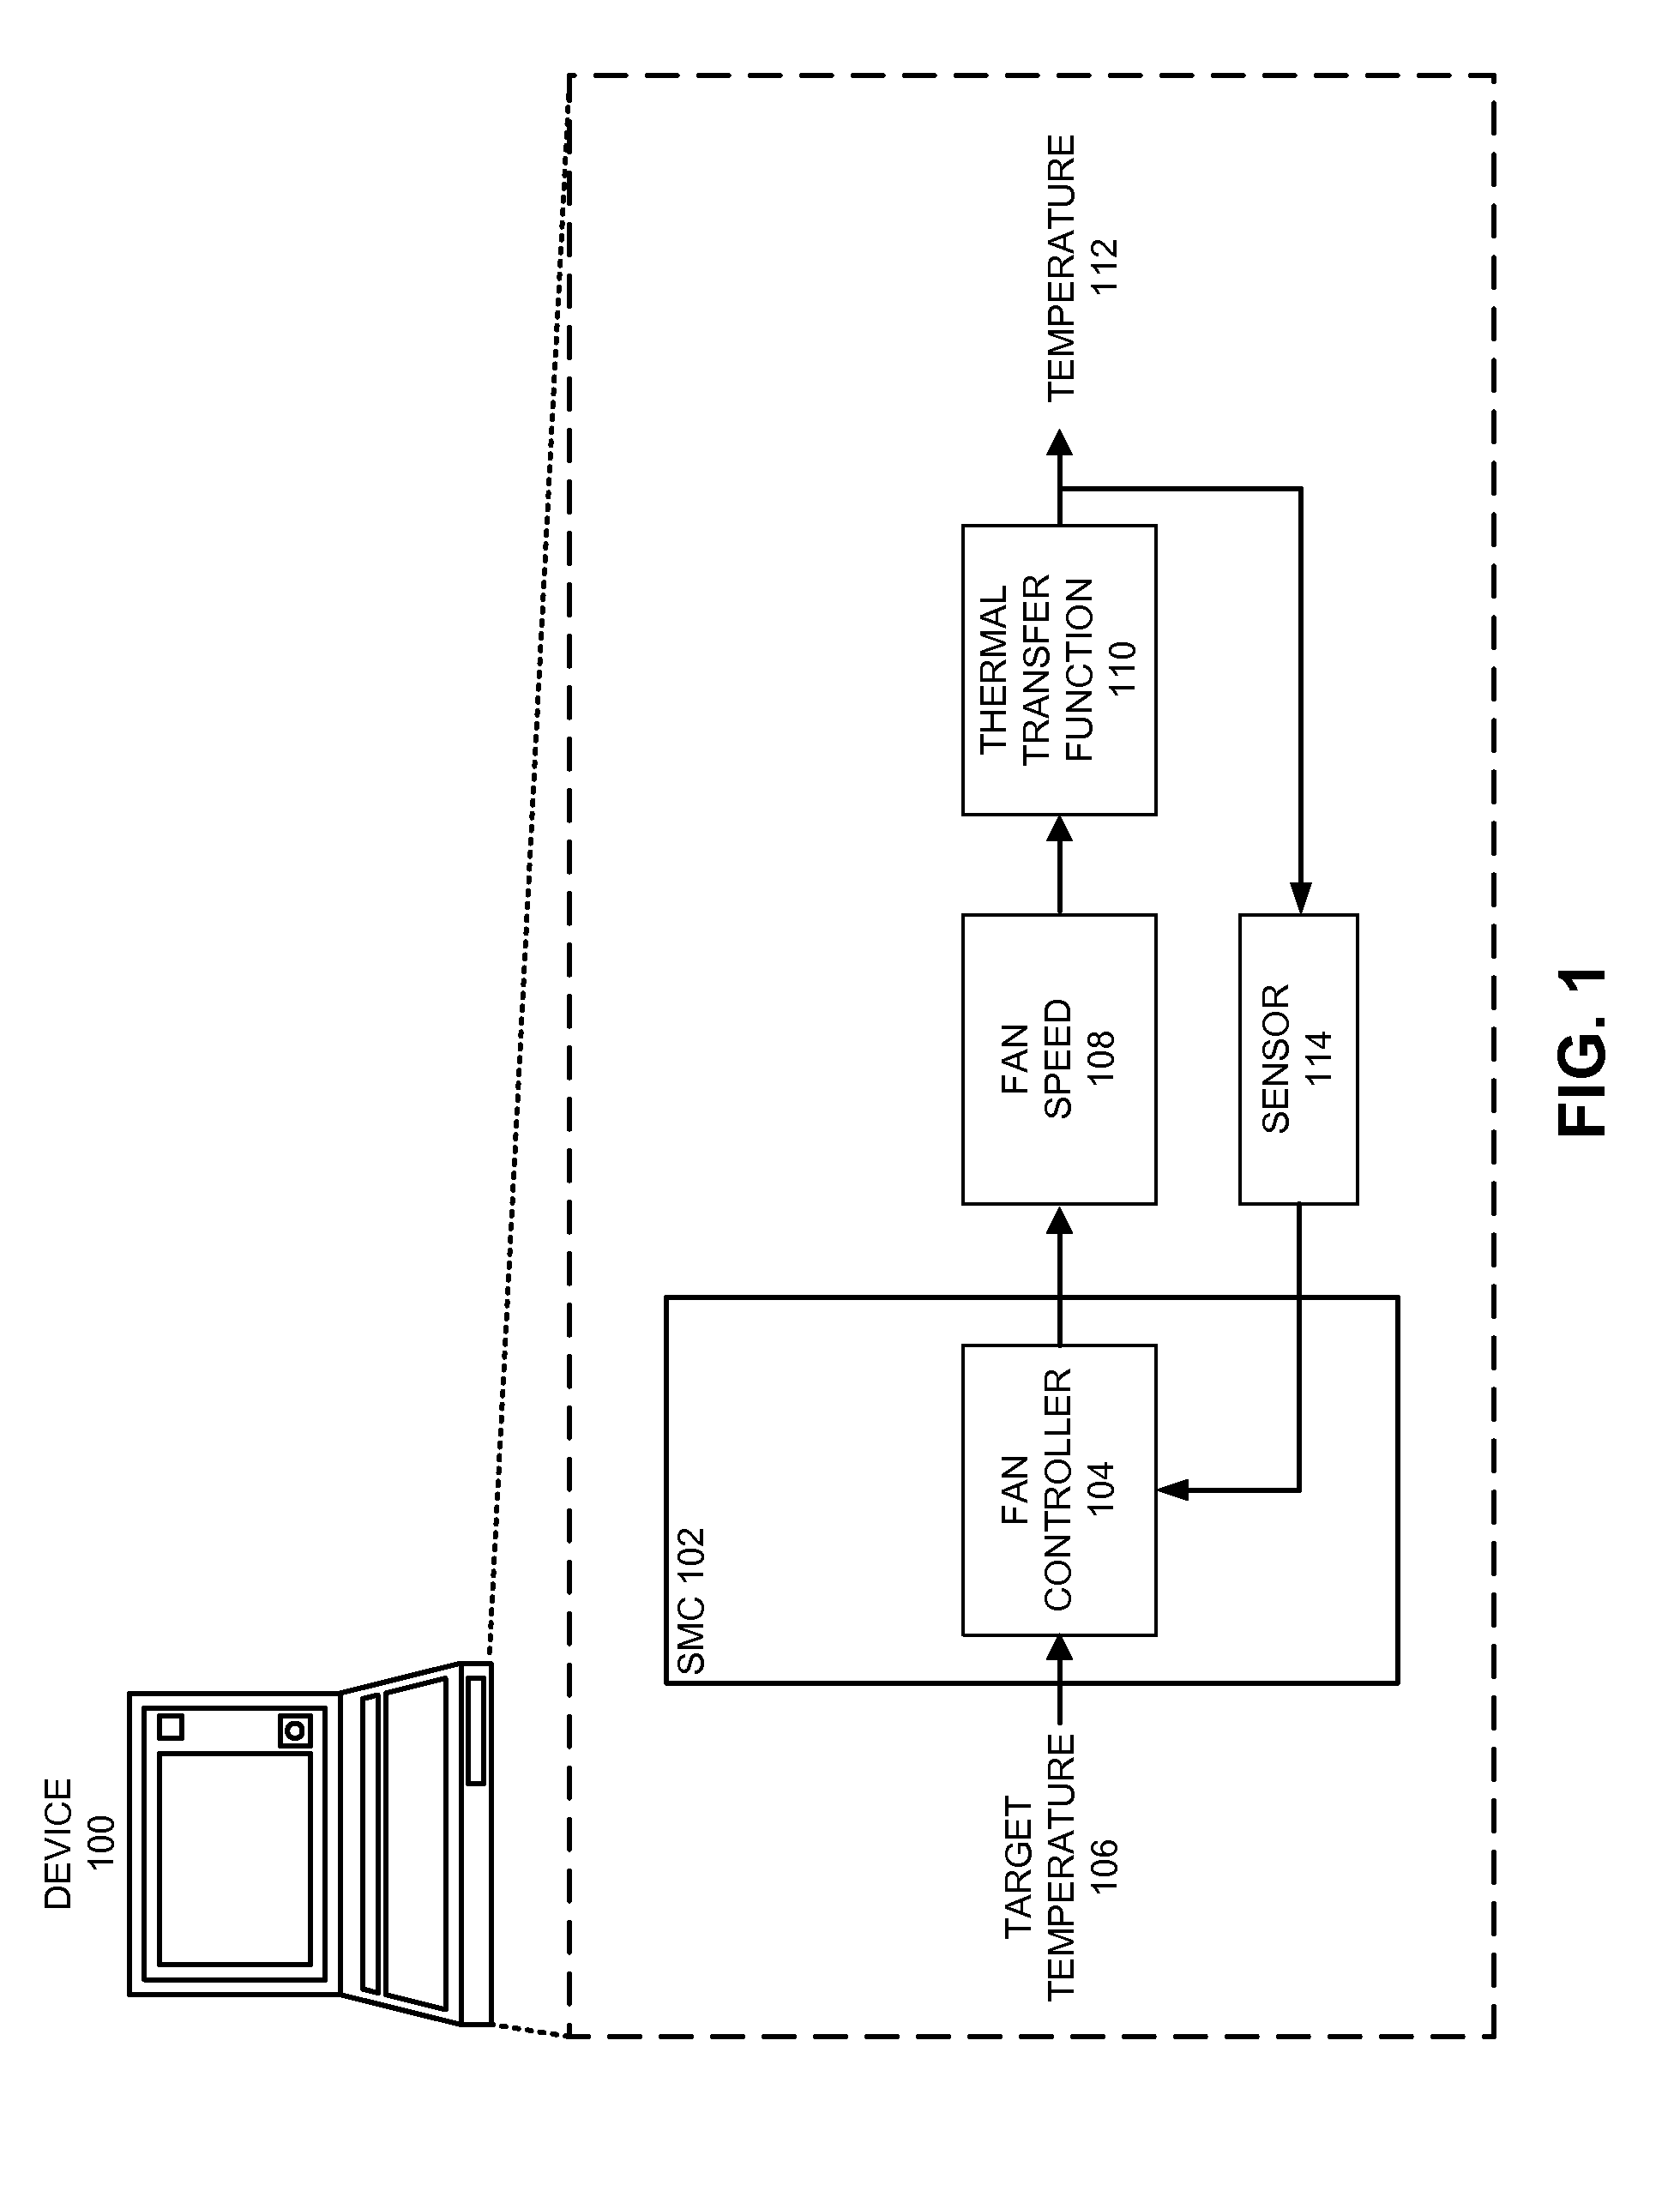 Reducing annoyance by managing the acoustic noise produced by a device